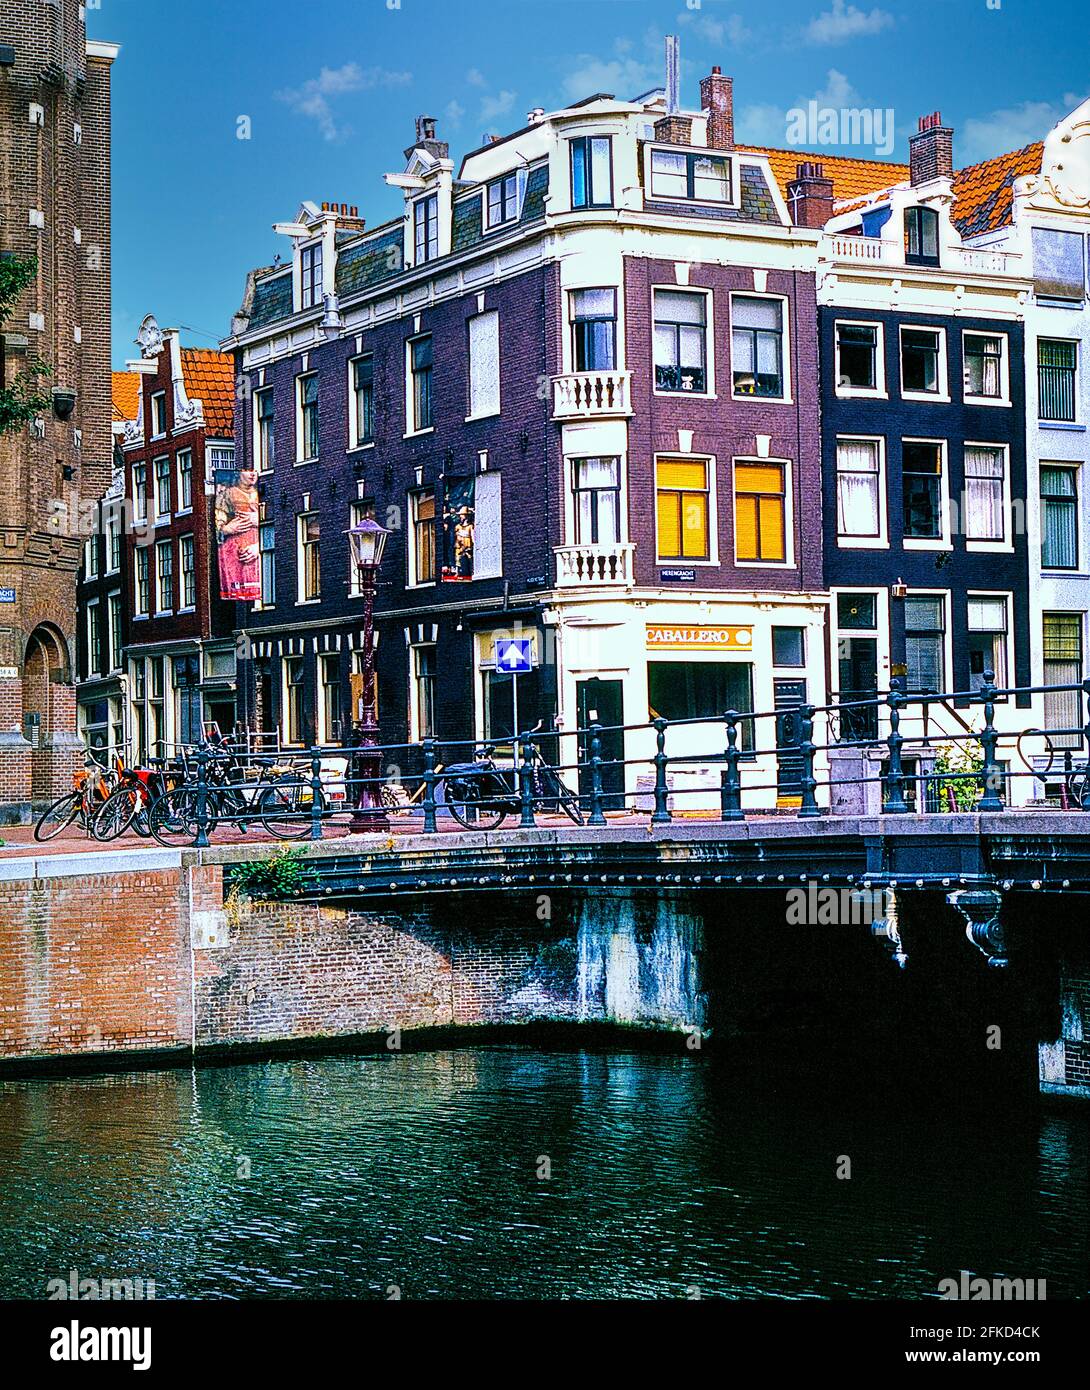 Image of the Buildings on the Herengracht Canal in Amsterdam, The Netherlands Stock Photo